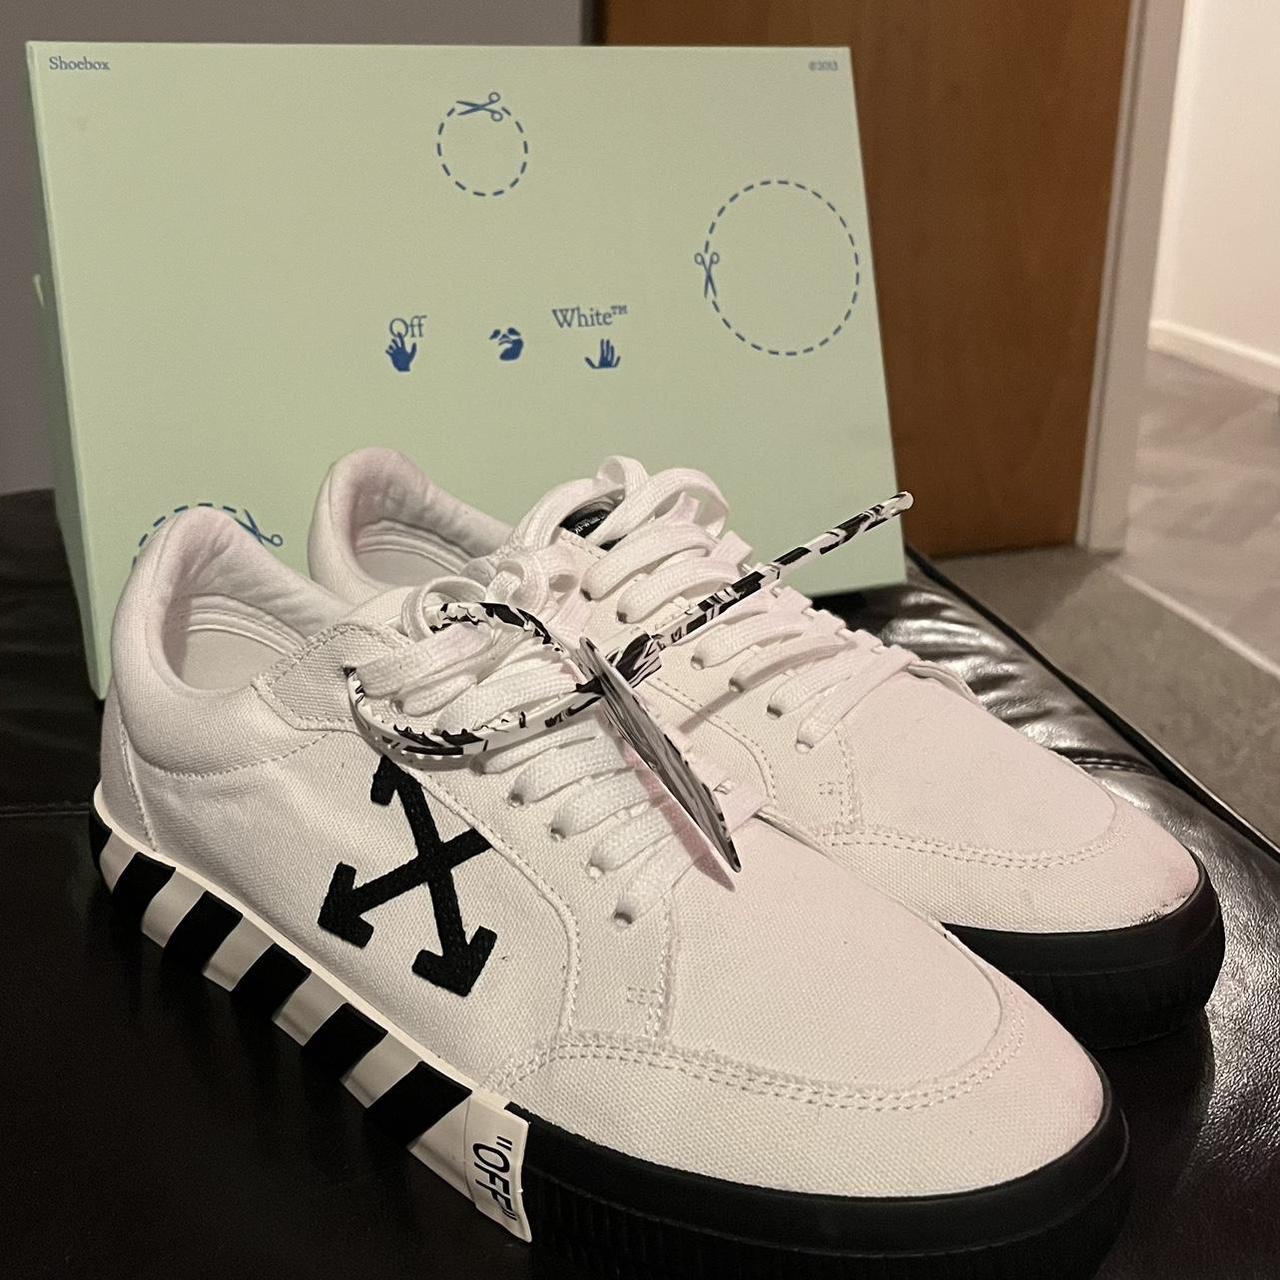 OFF WHITE Vulcan low Only worn a few times, great... - Depop